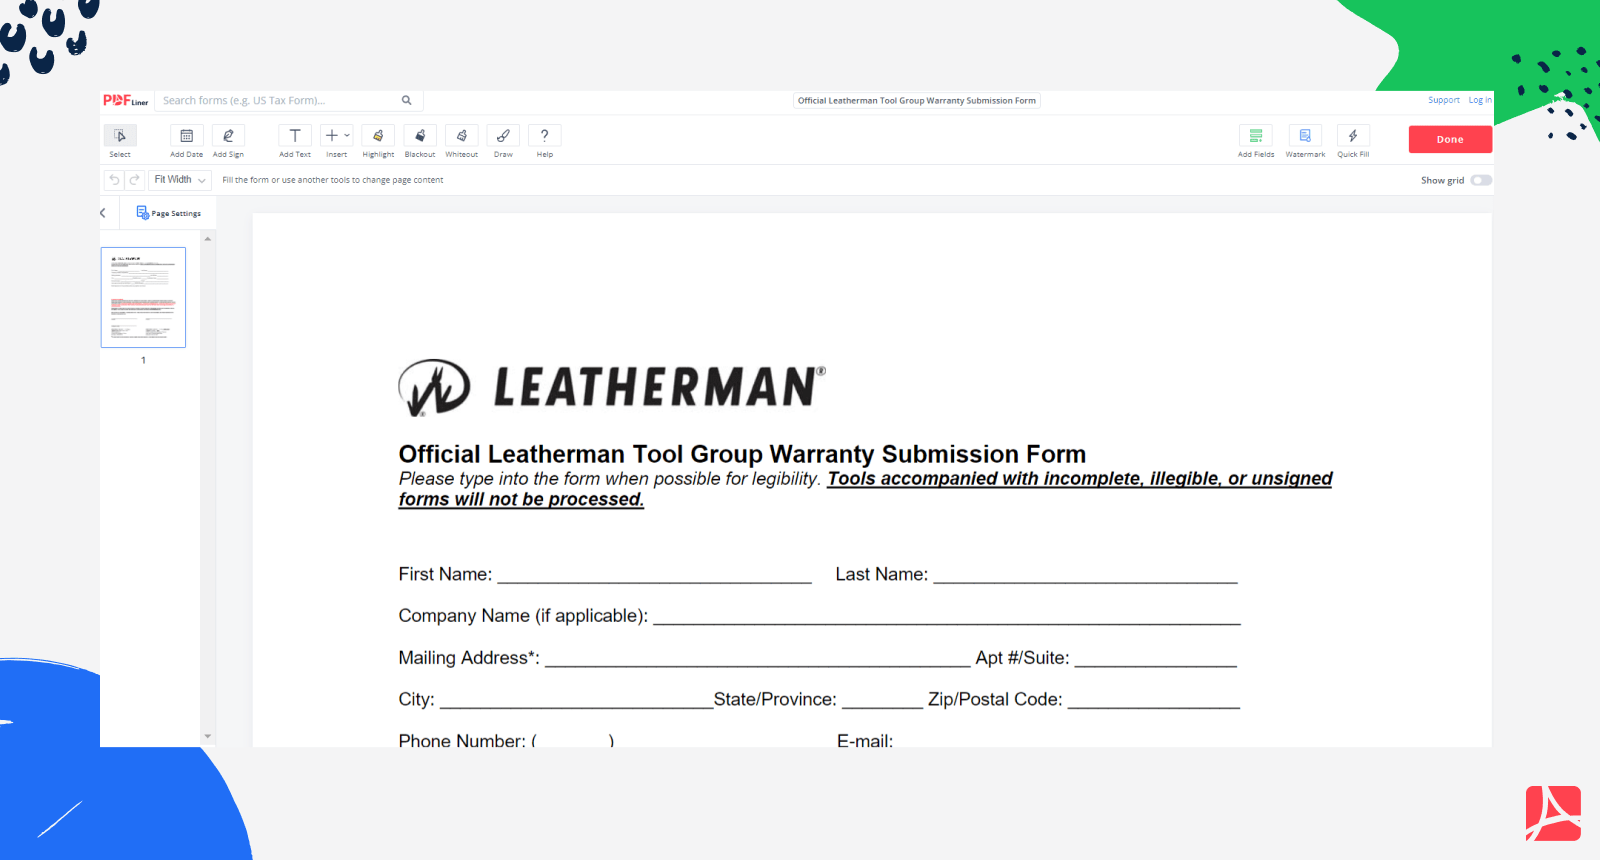 Official Leatherman Tool Group Warranty Submission Form